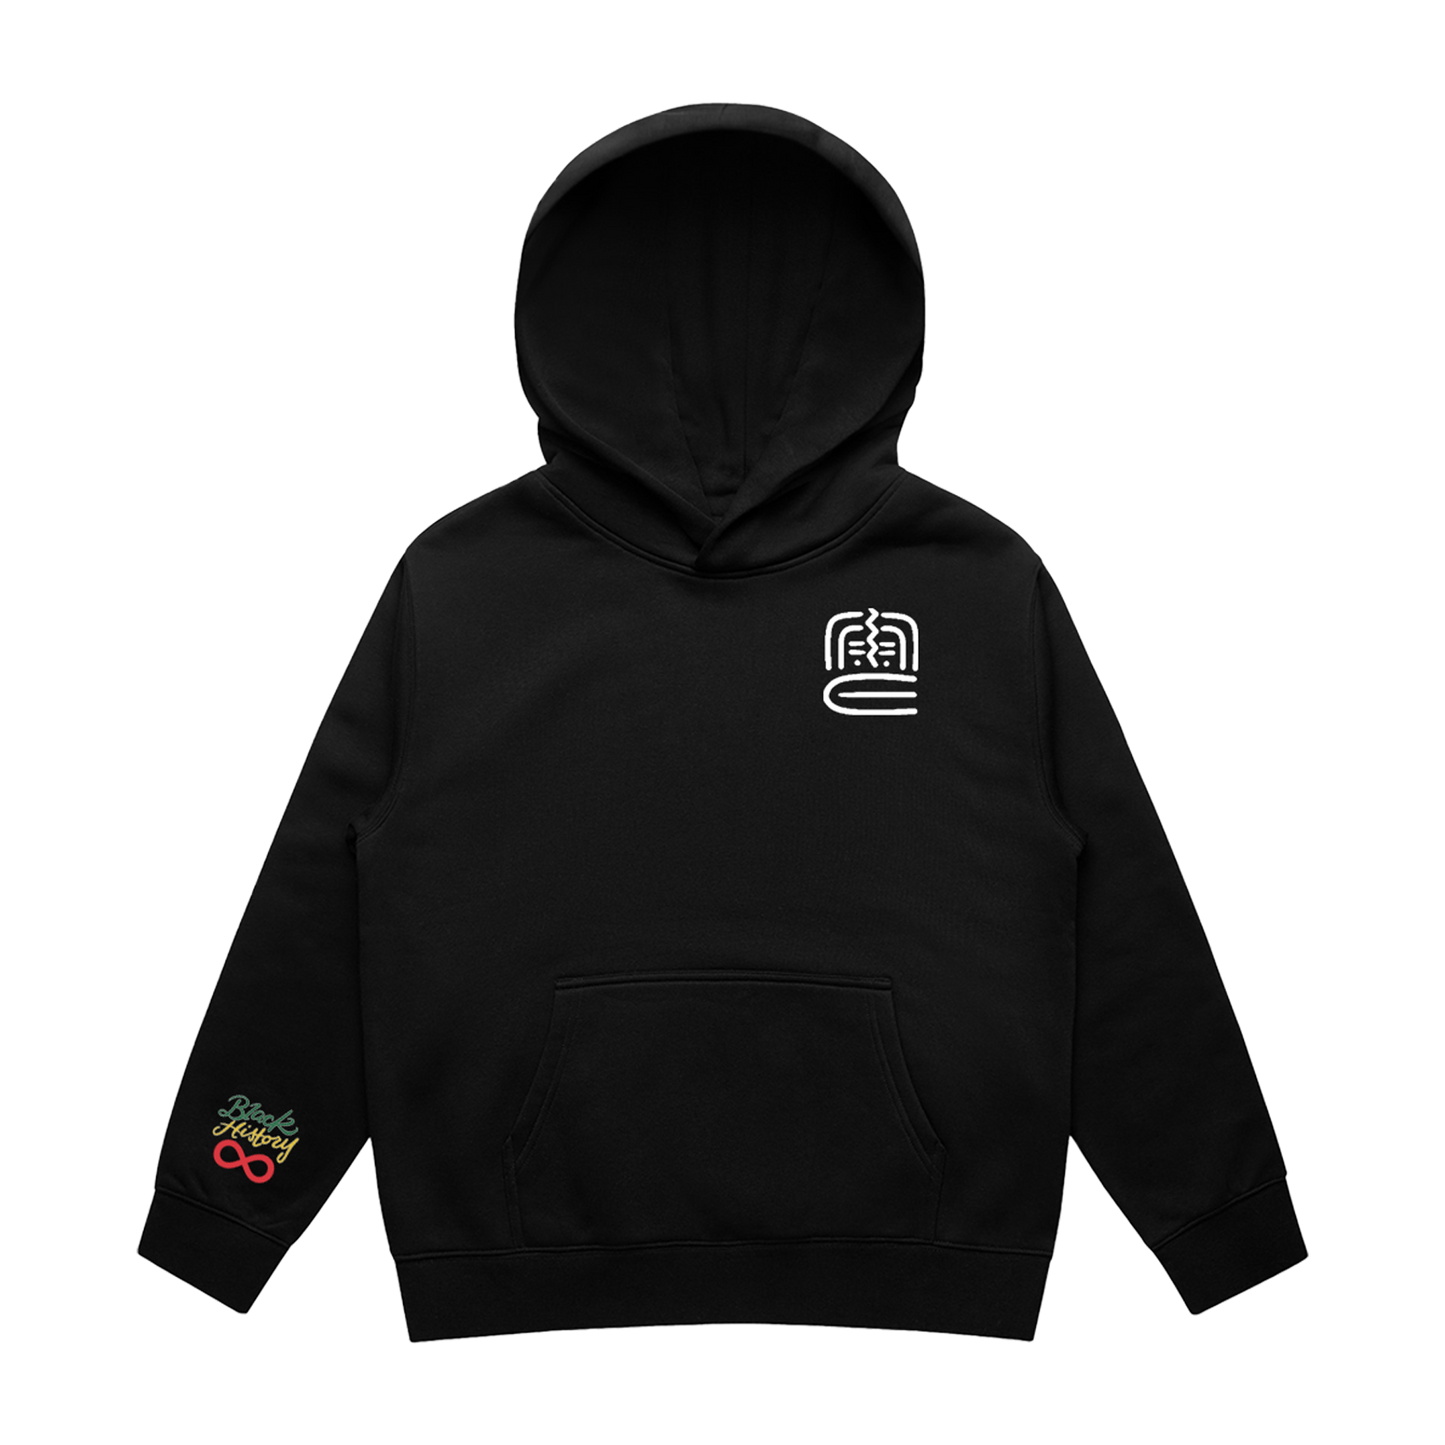 Tribal Mask Youth Pullover- Black